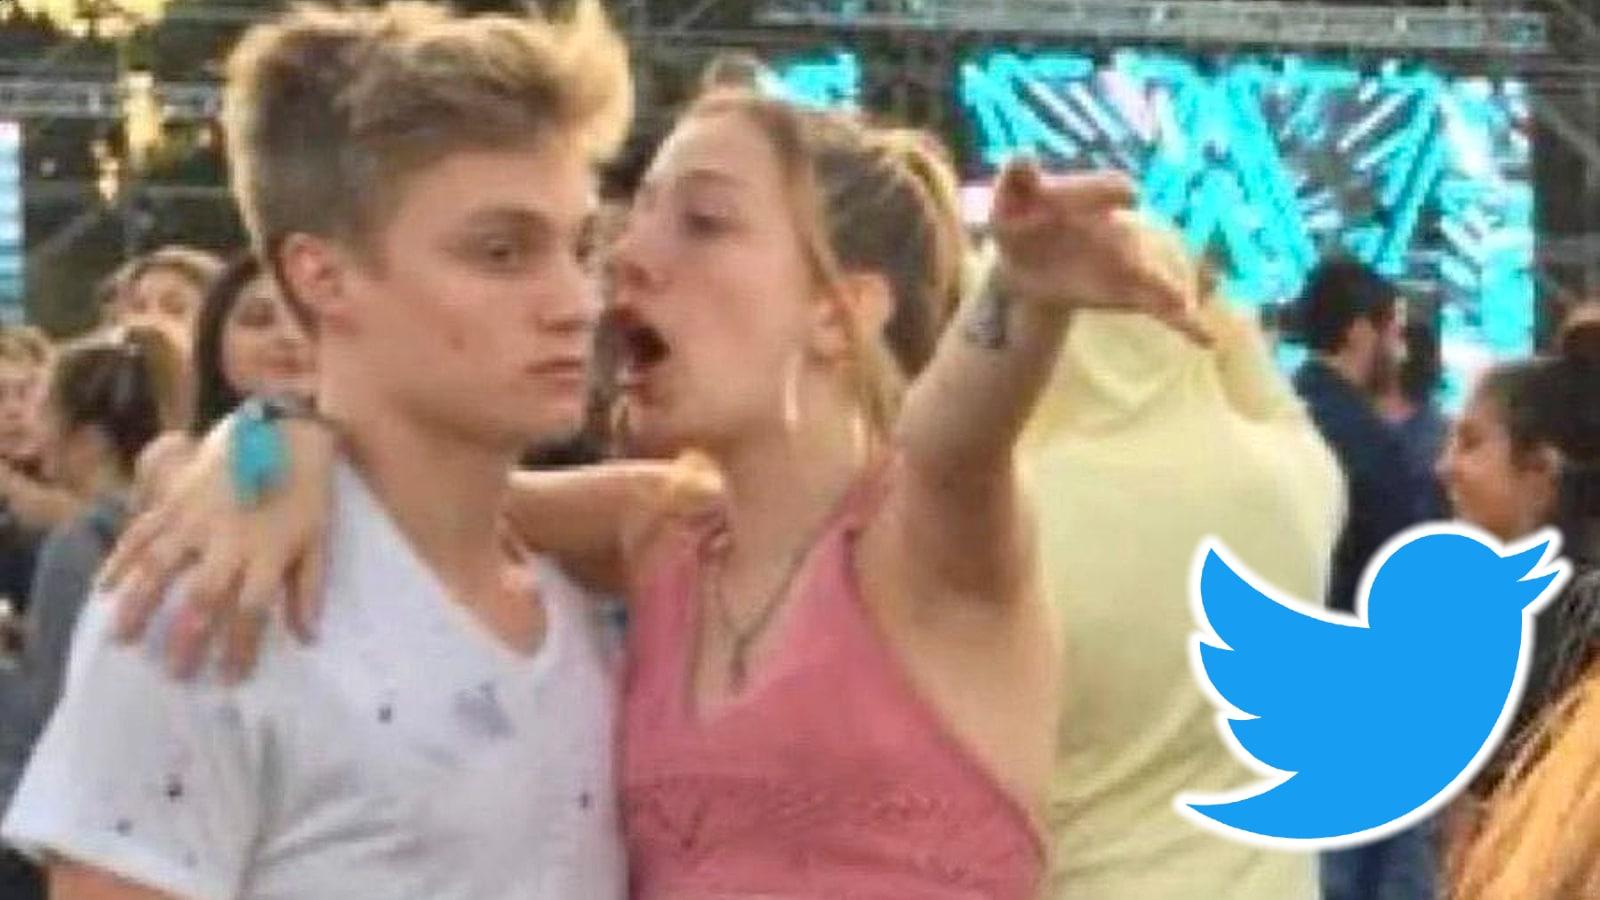 Woman shouts at man in new meme